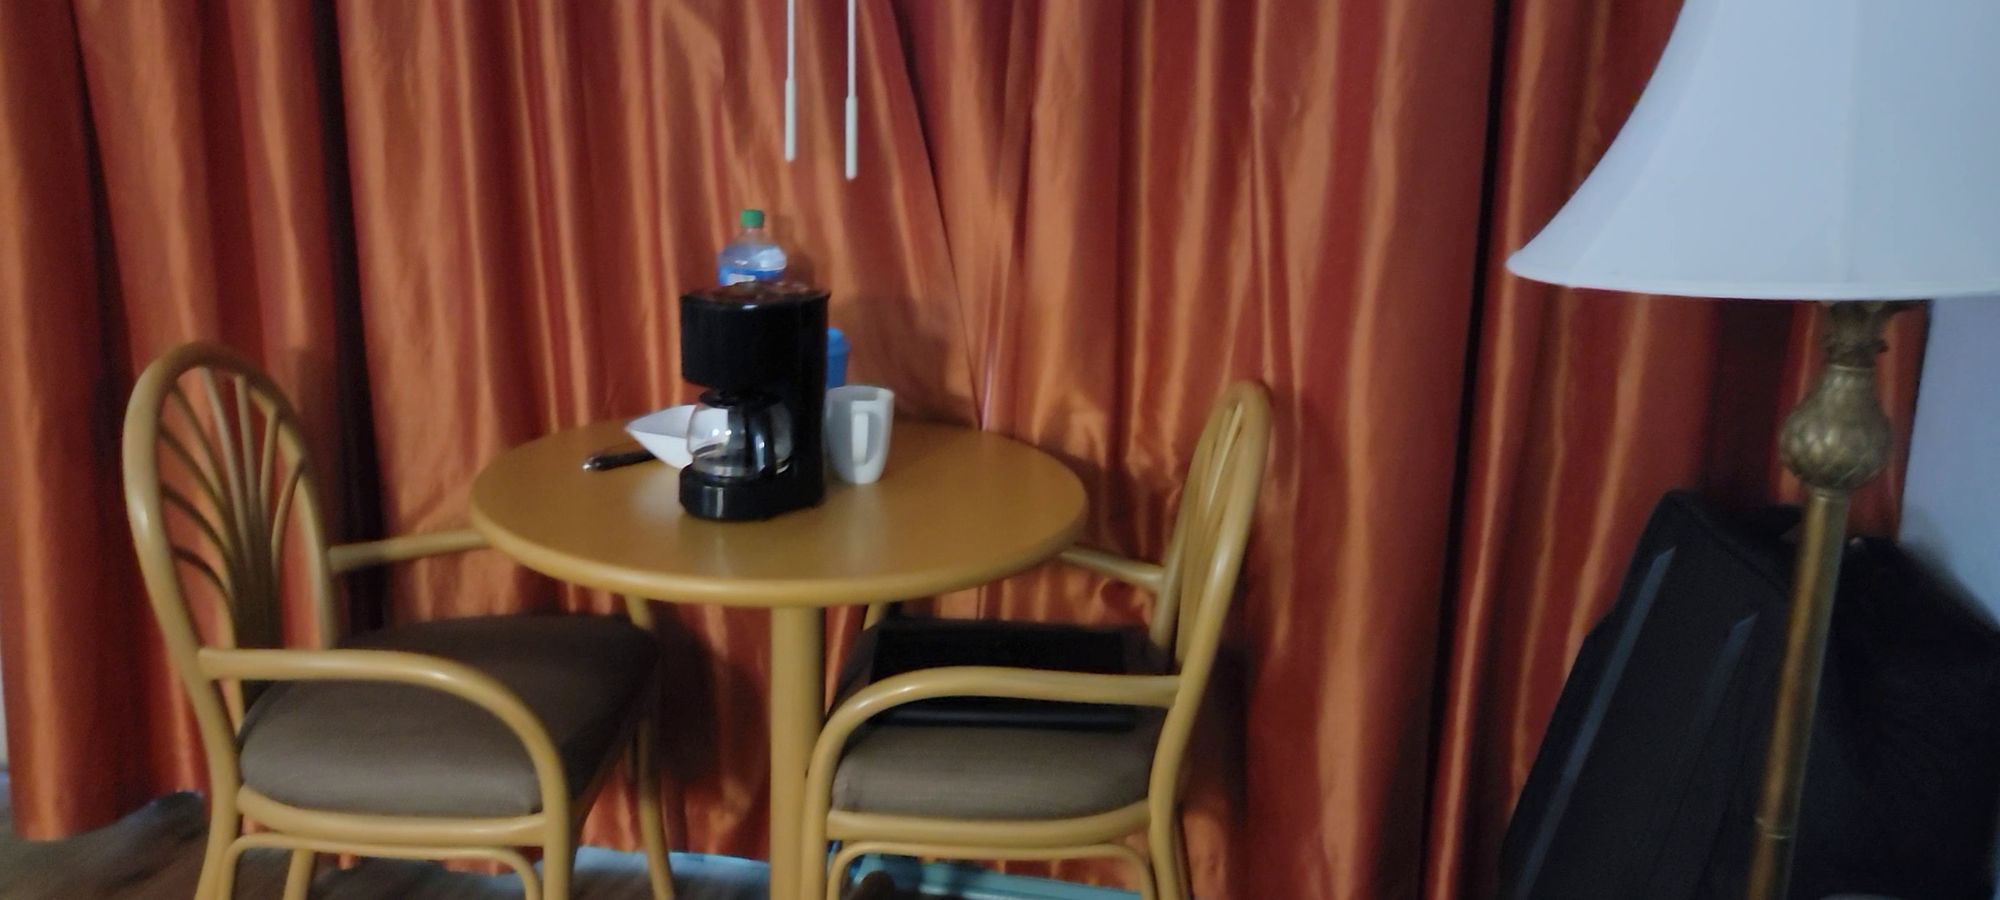 An image of a coffeepot sitting on a table, with two chairs and a lamp nearby